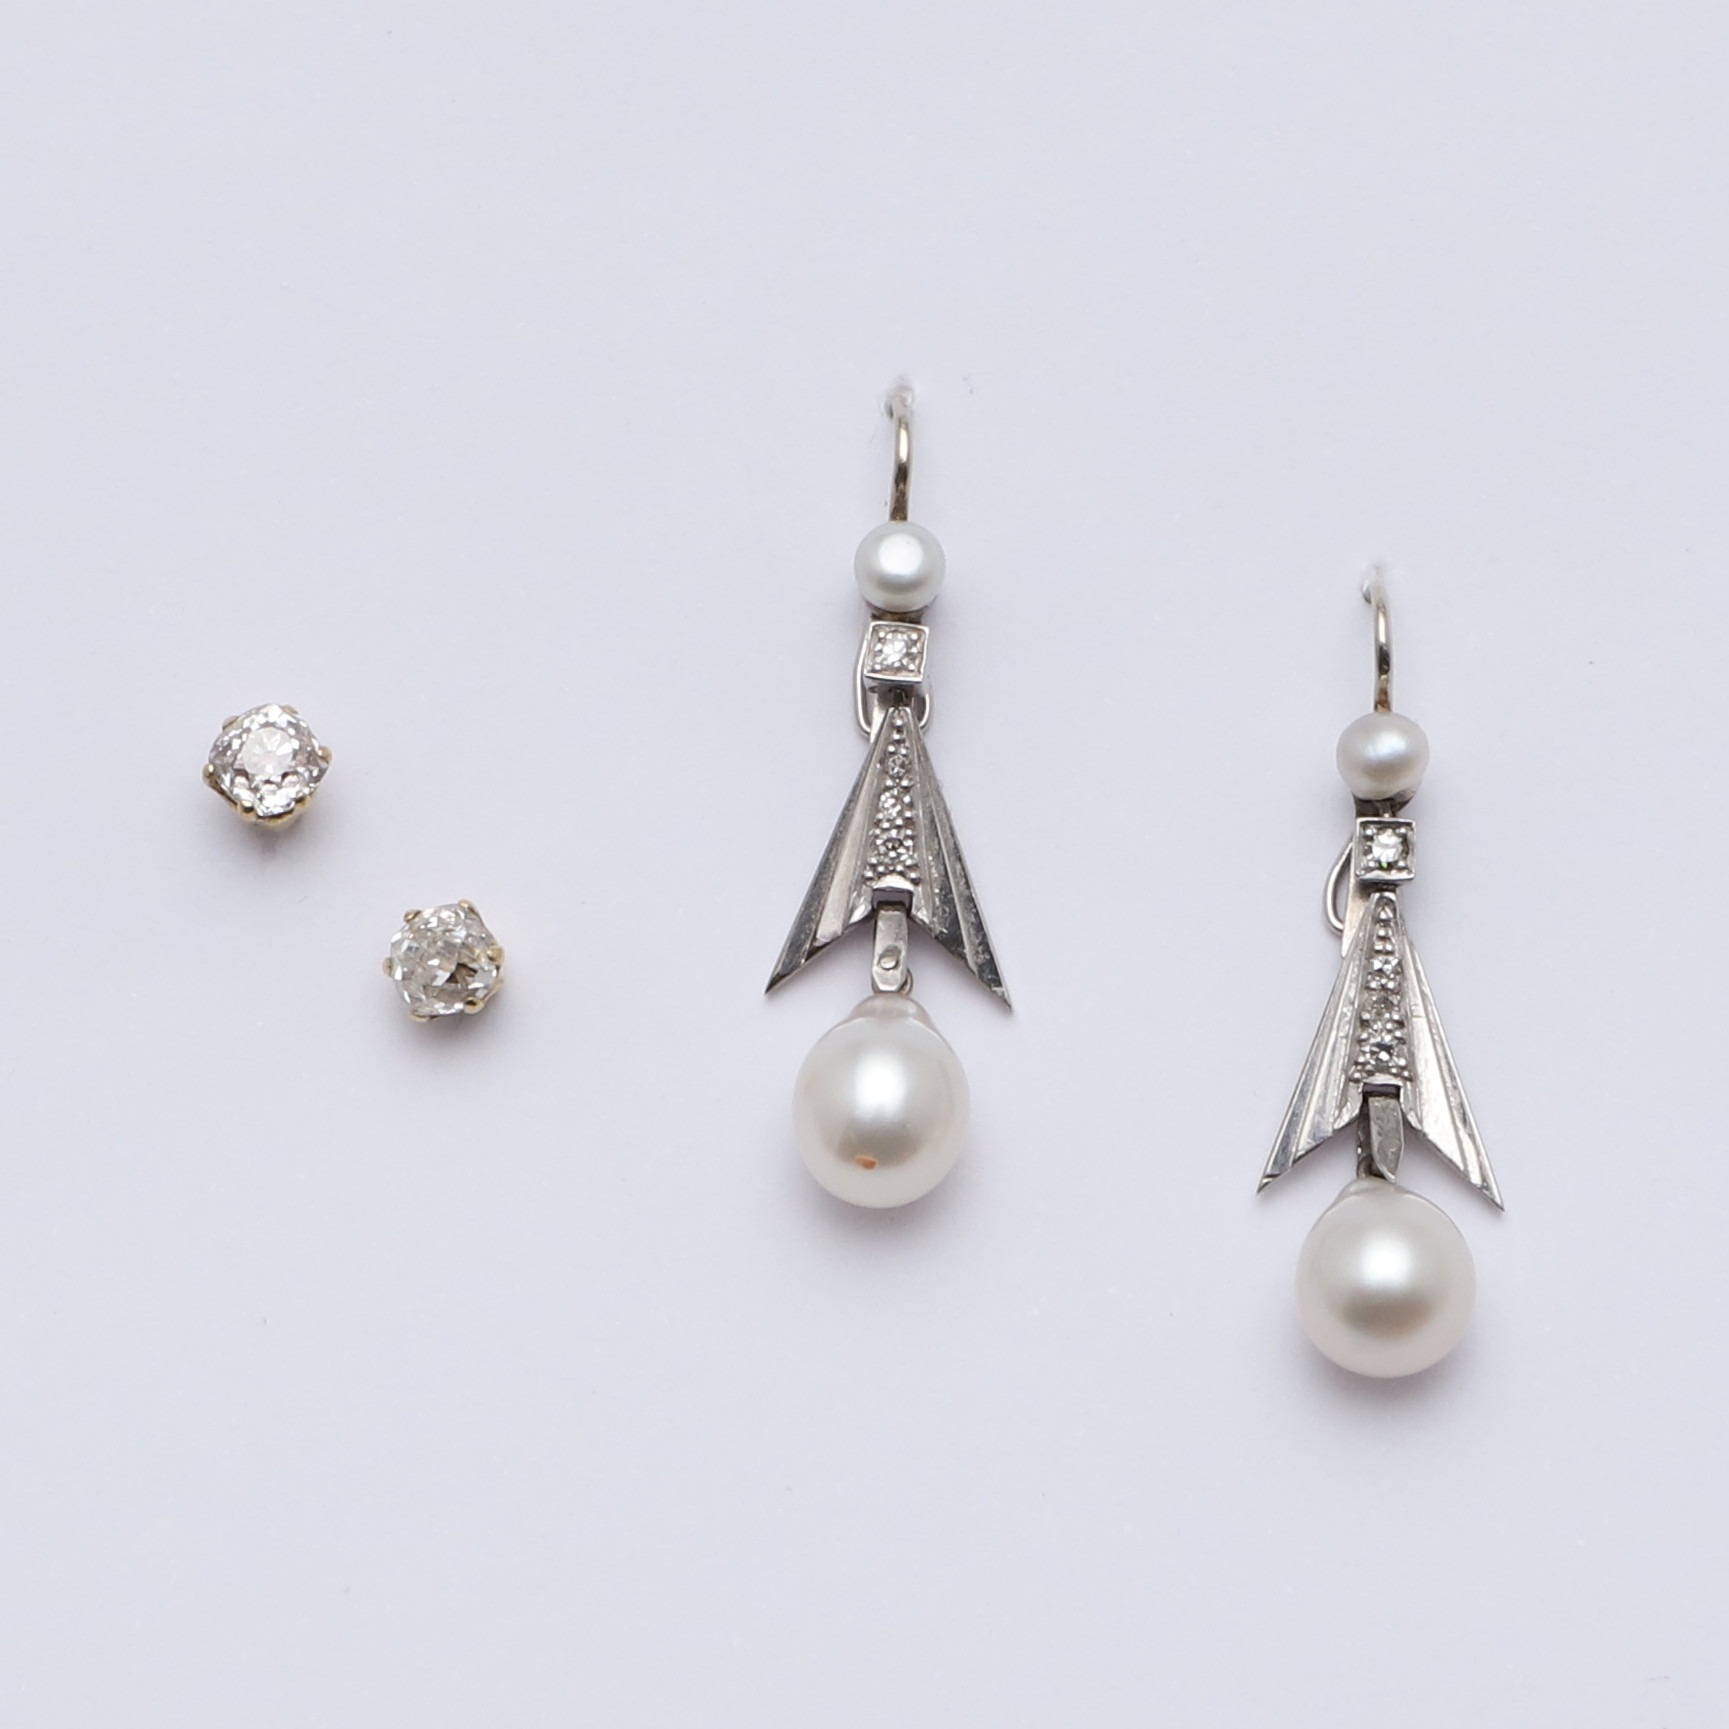 A PAIR OF DIAMOND AND CULTURED PEARL DROP EARRINGS.